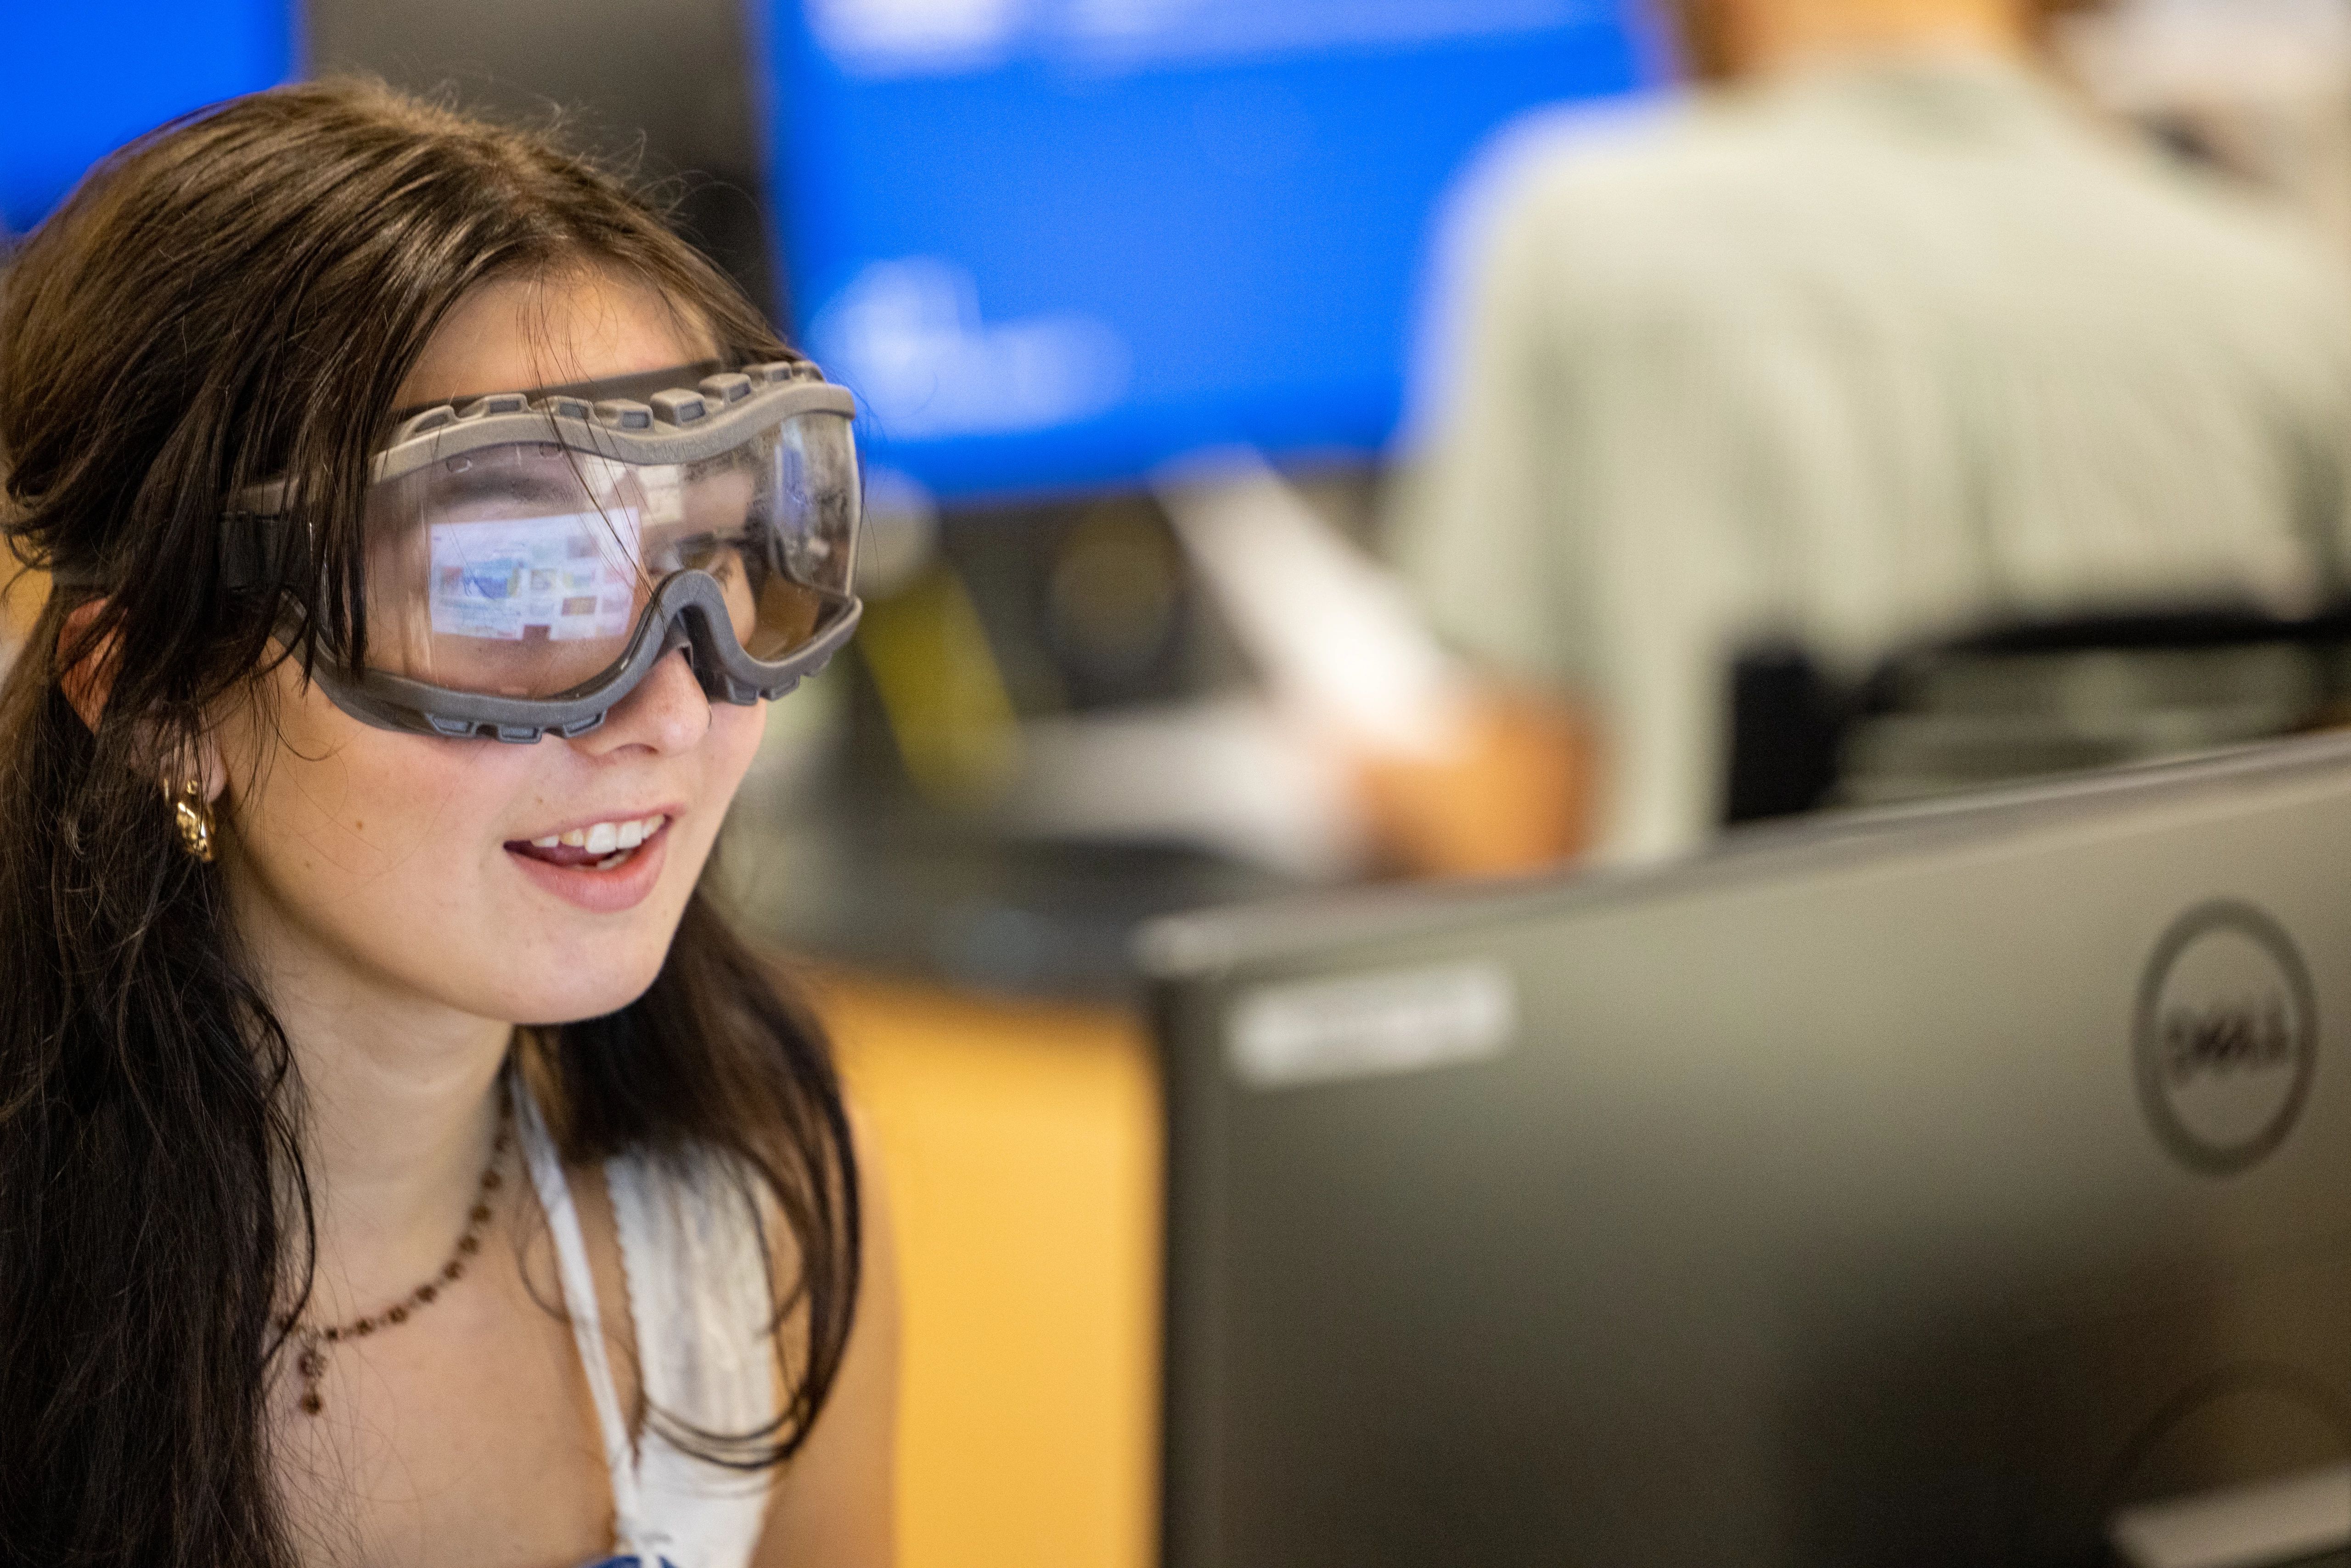 A student wearing goggles working on a computer at N A U